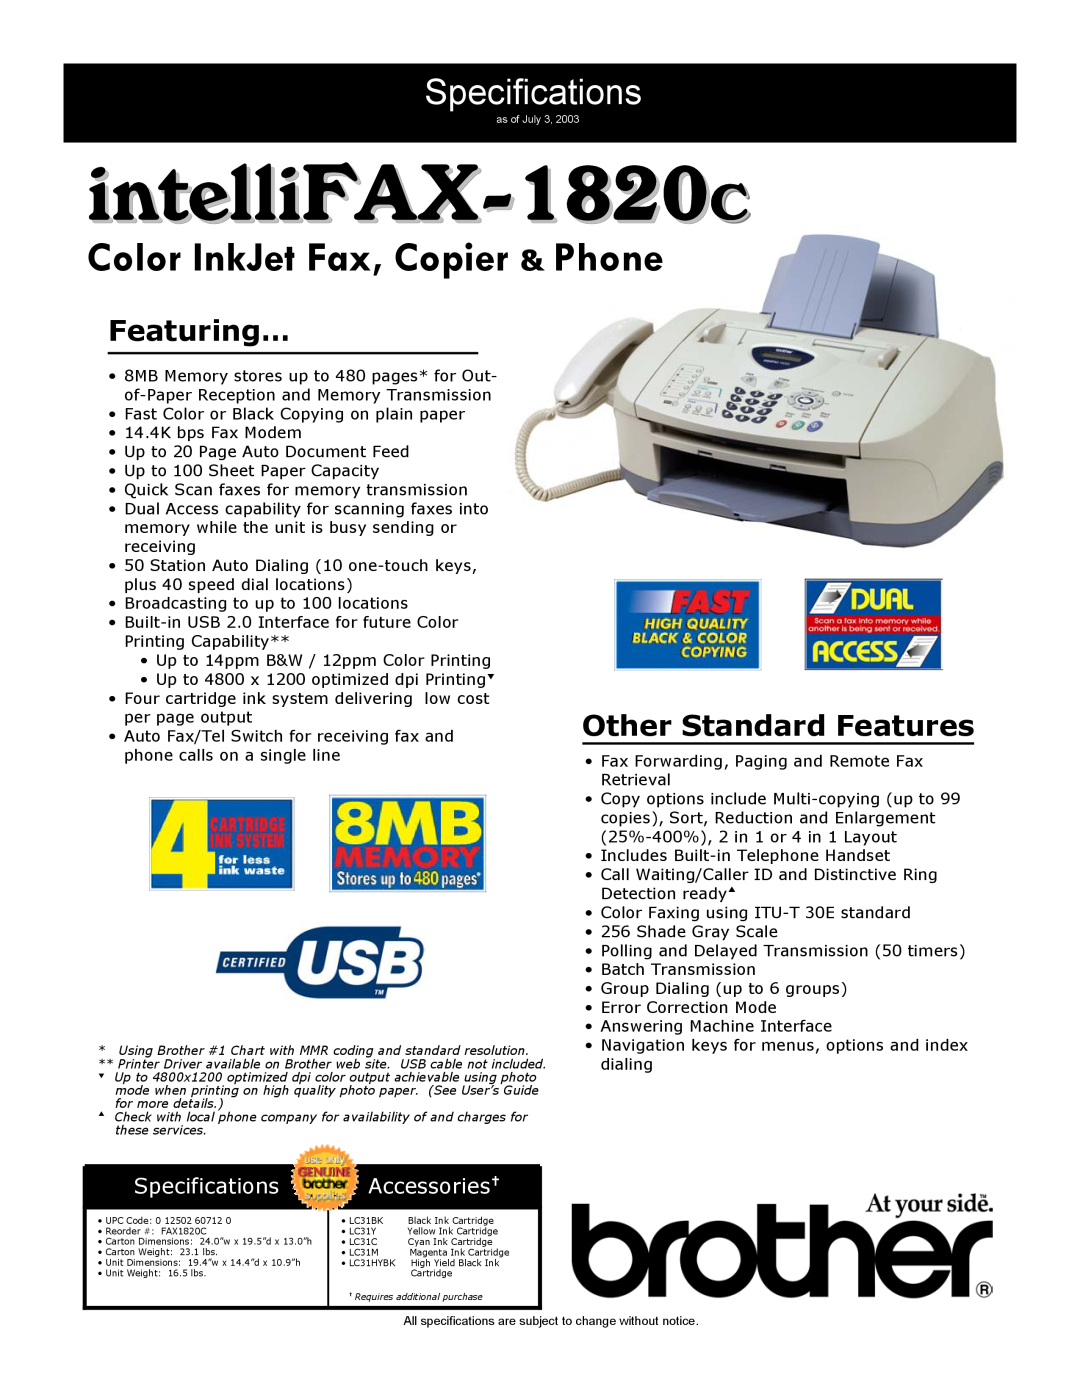 Brother specifications intelliFAX-1820C, Color InkJet Fax, Copier & Phone, Specifications, Featuring…, Accessories† 